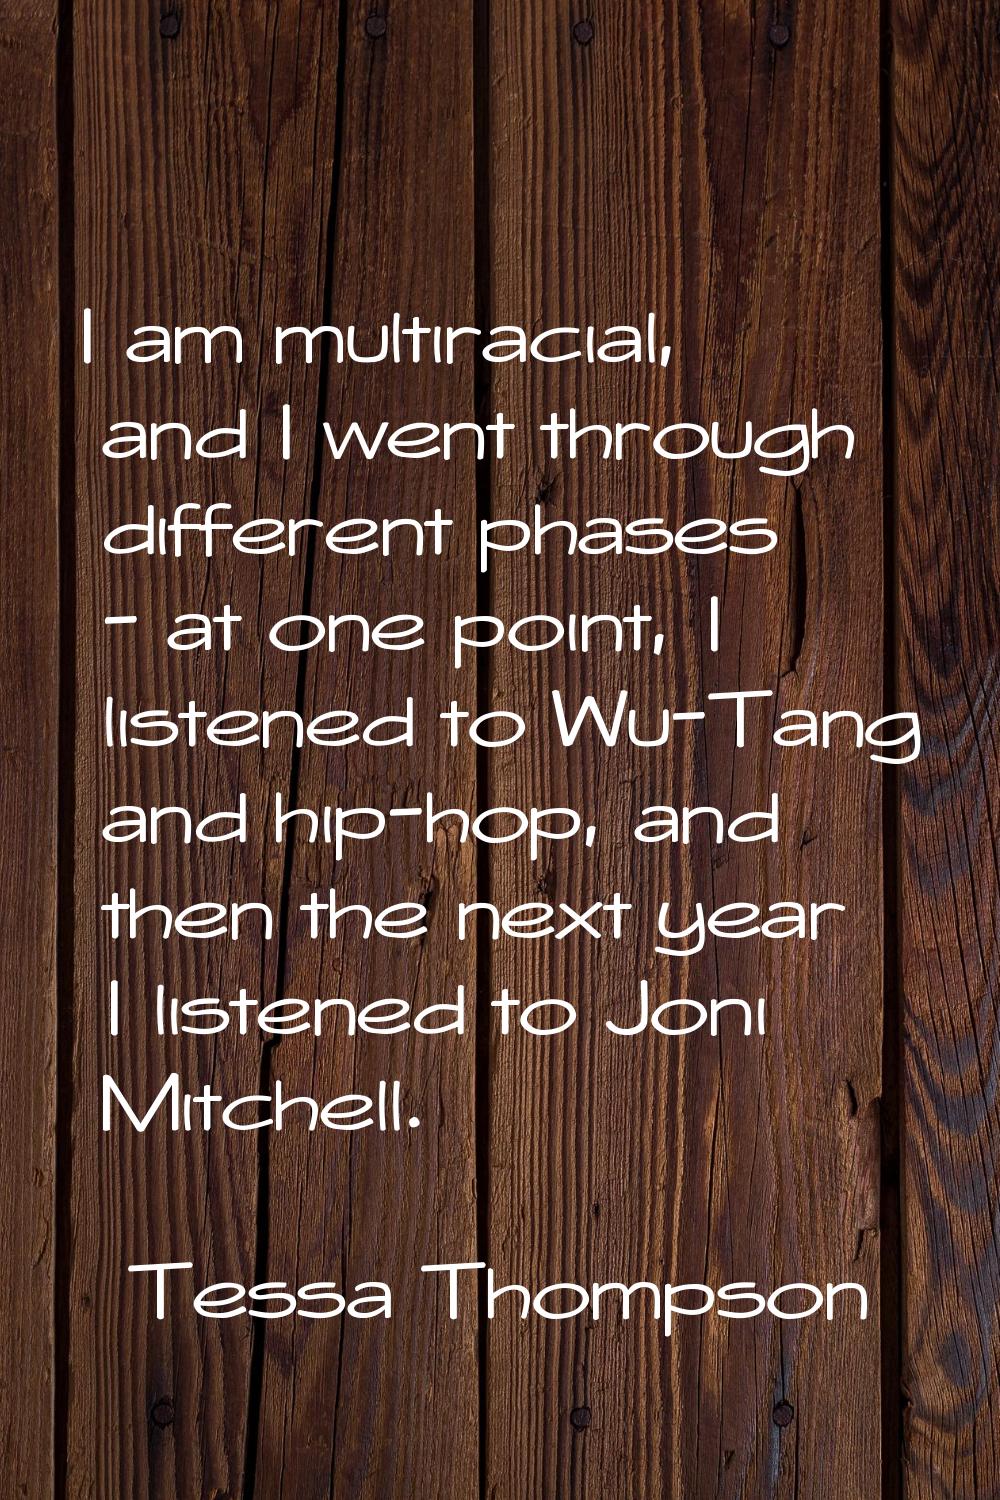 I am multiracial, and I went through different phases - at one point, I listened to Wu-Tang and hip